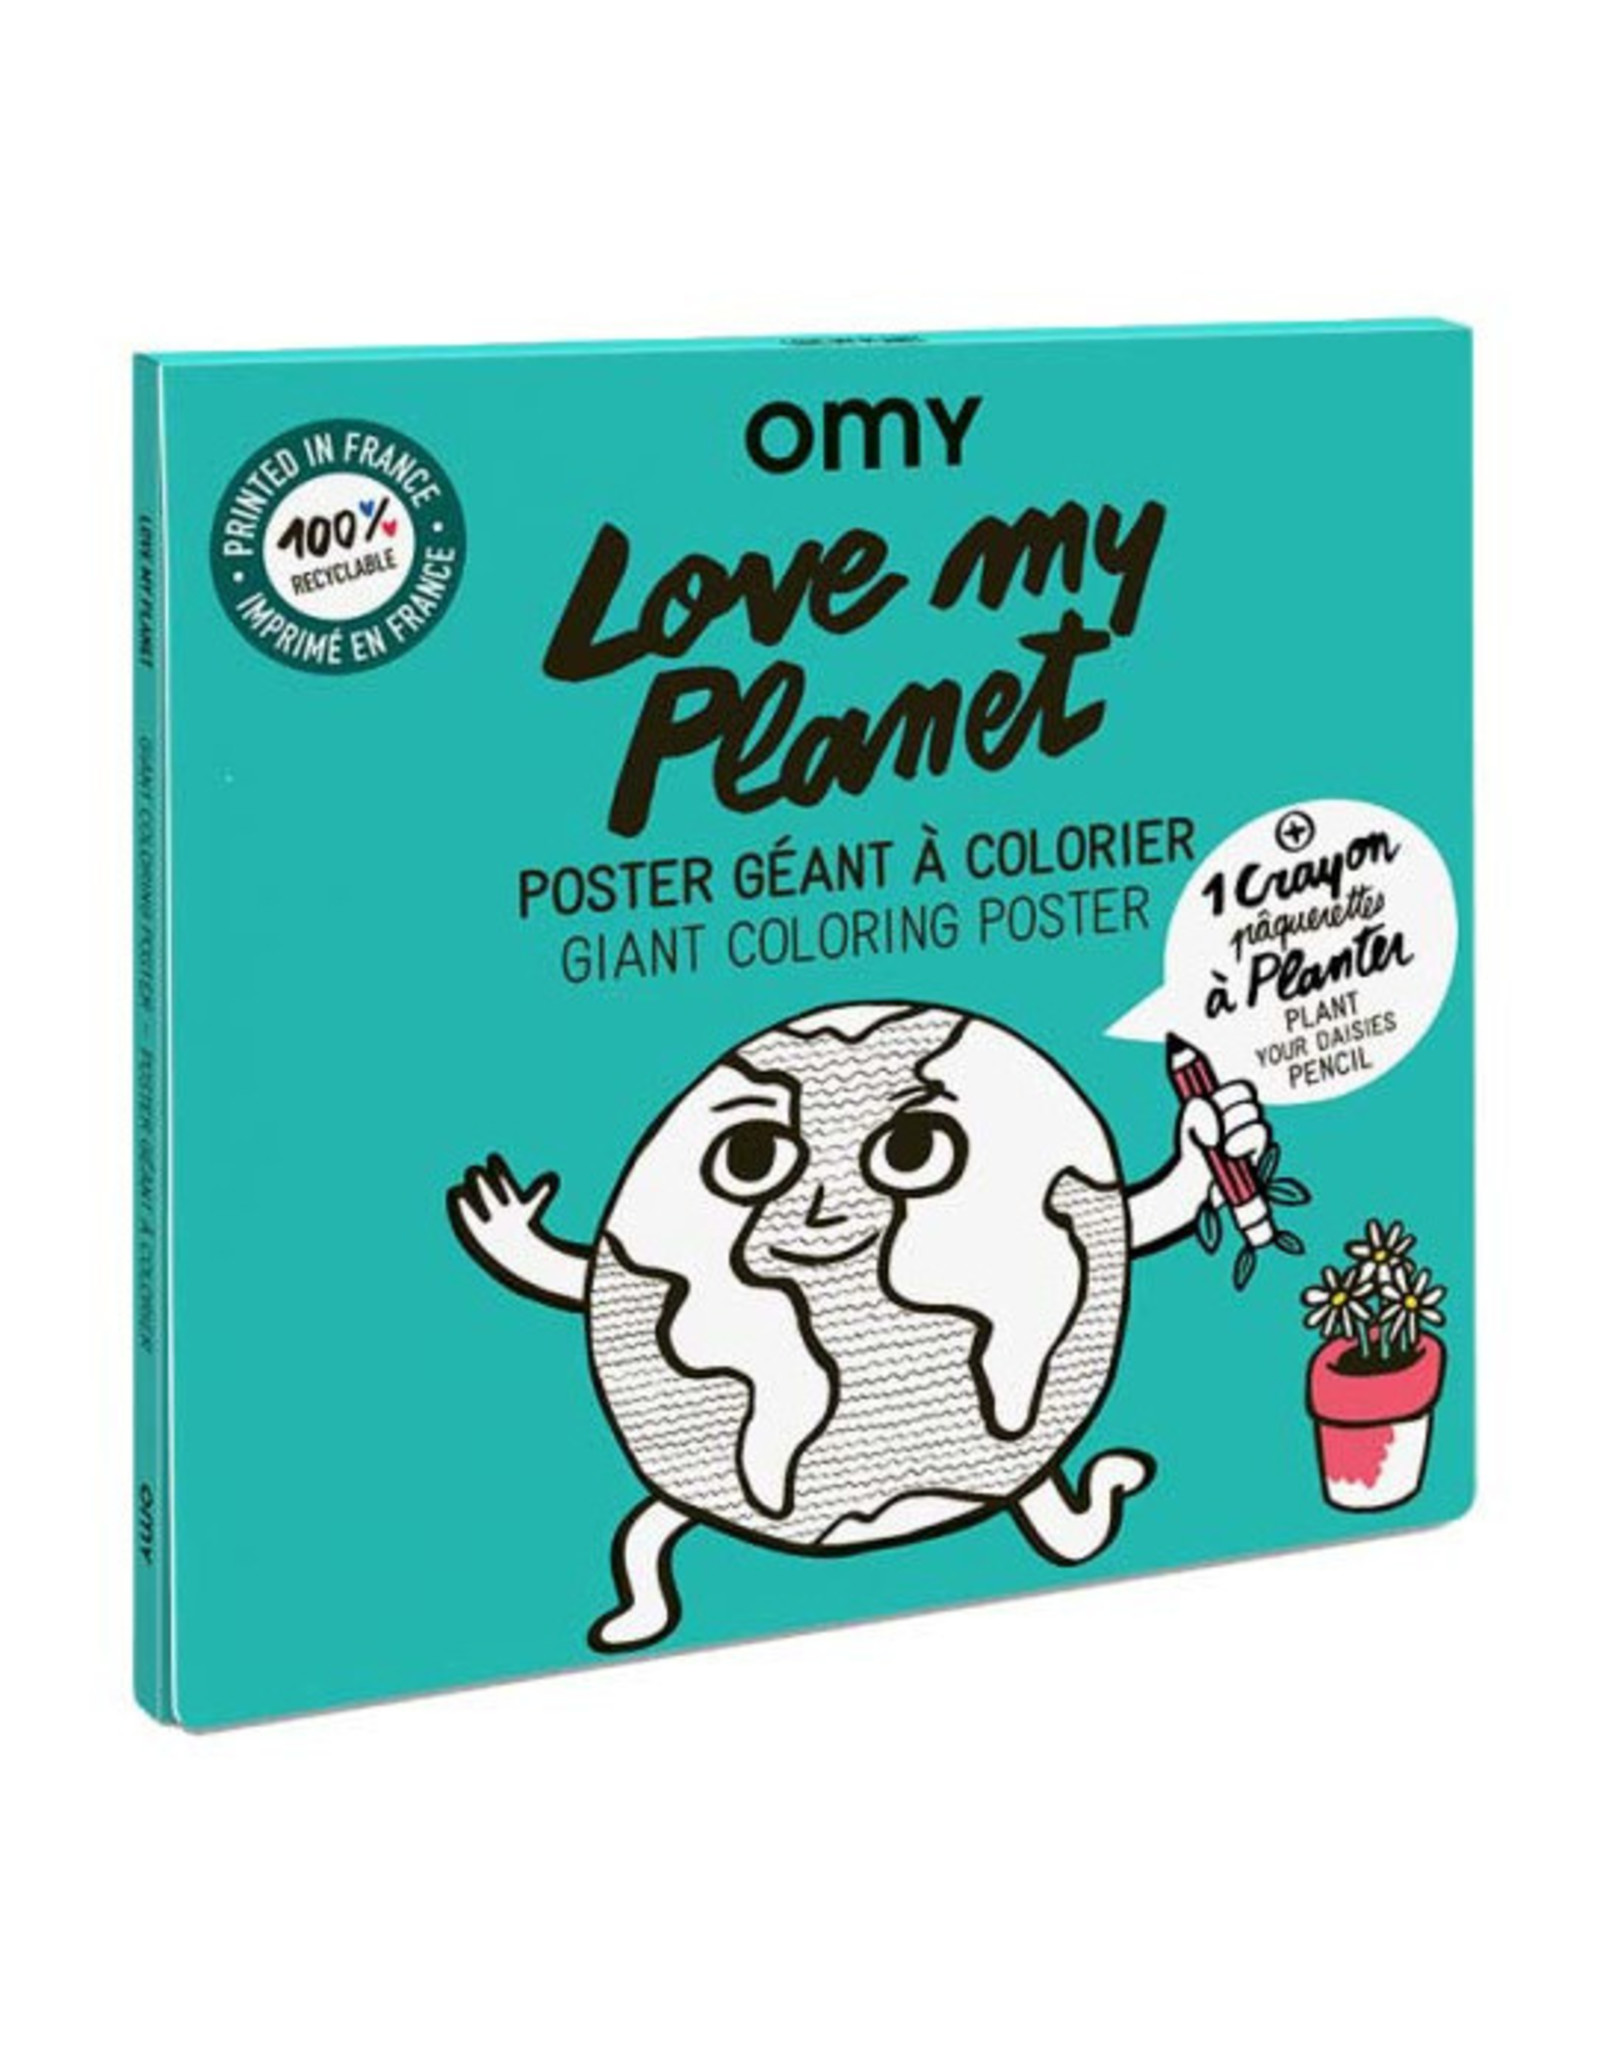 Omy Poster Love my planet